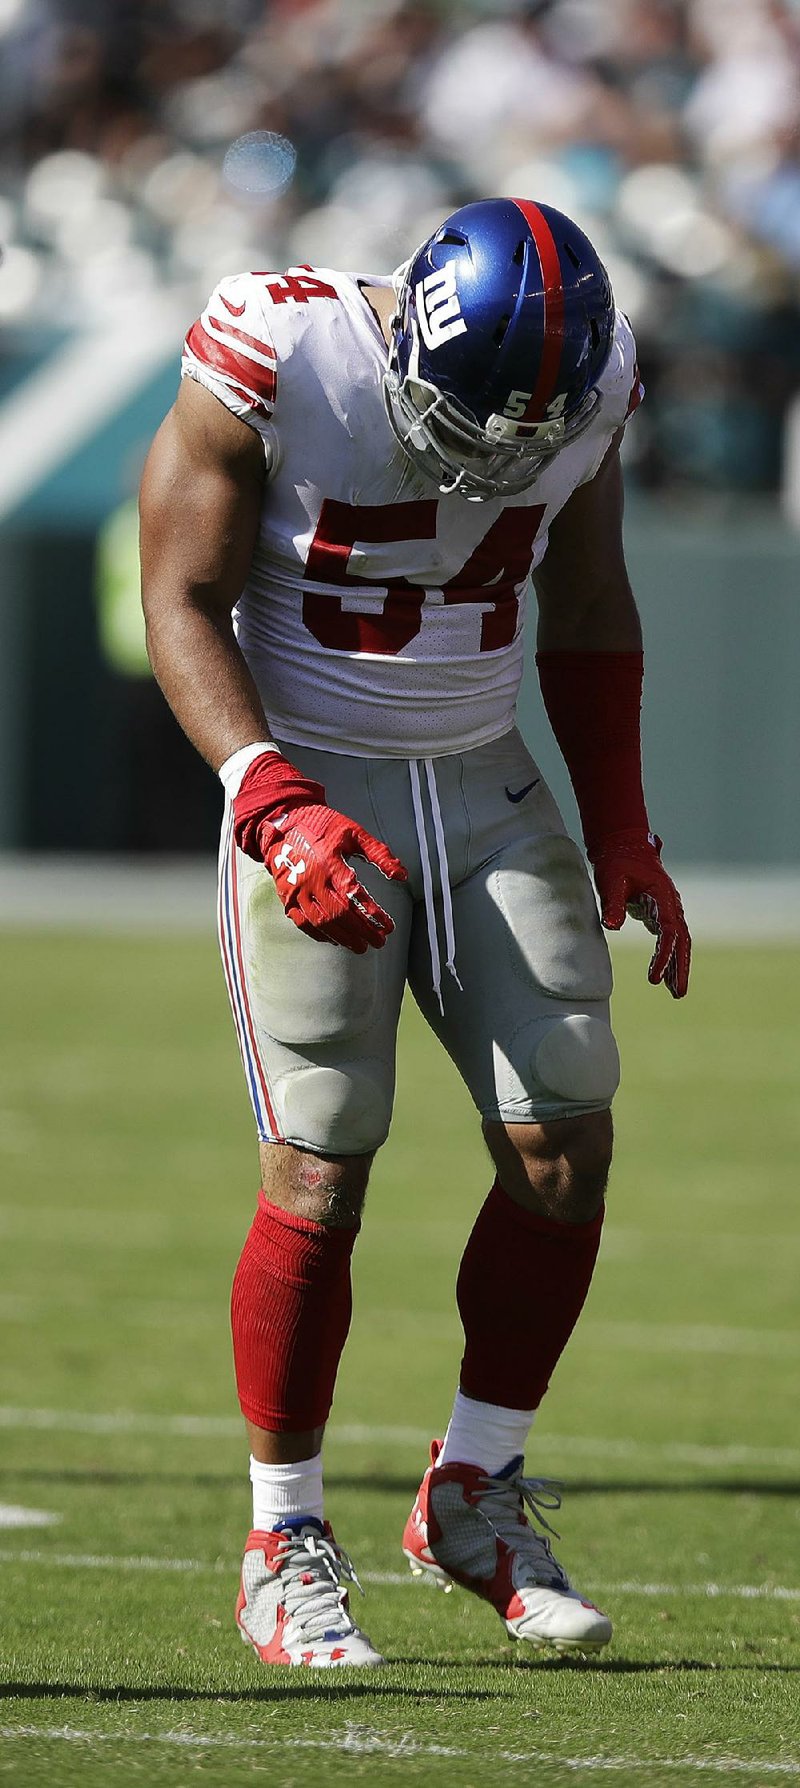 New York Giants’ Olivier Vernon hobbles off the field with an ankle injury in Sunday’s game in Philadelphia.